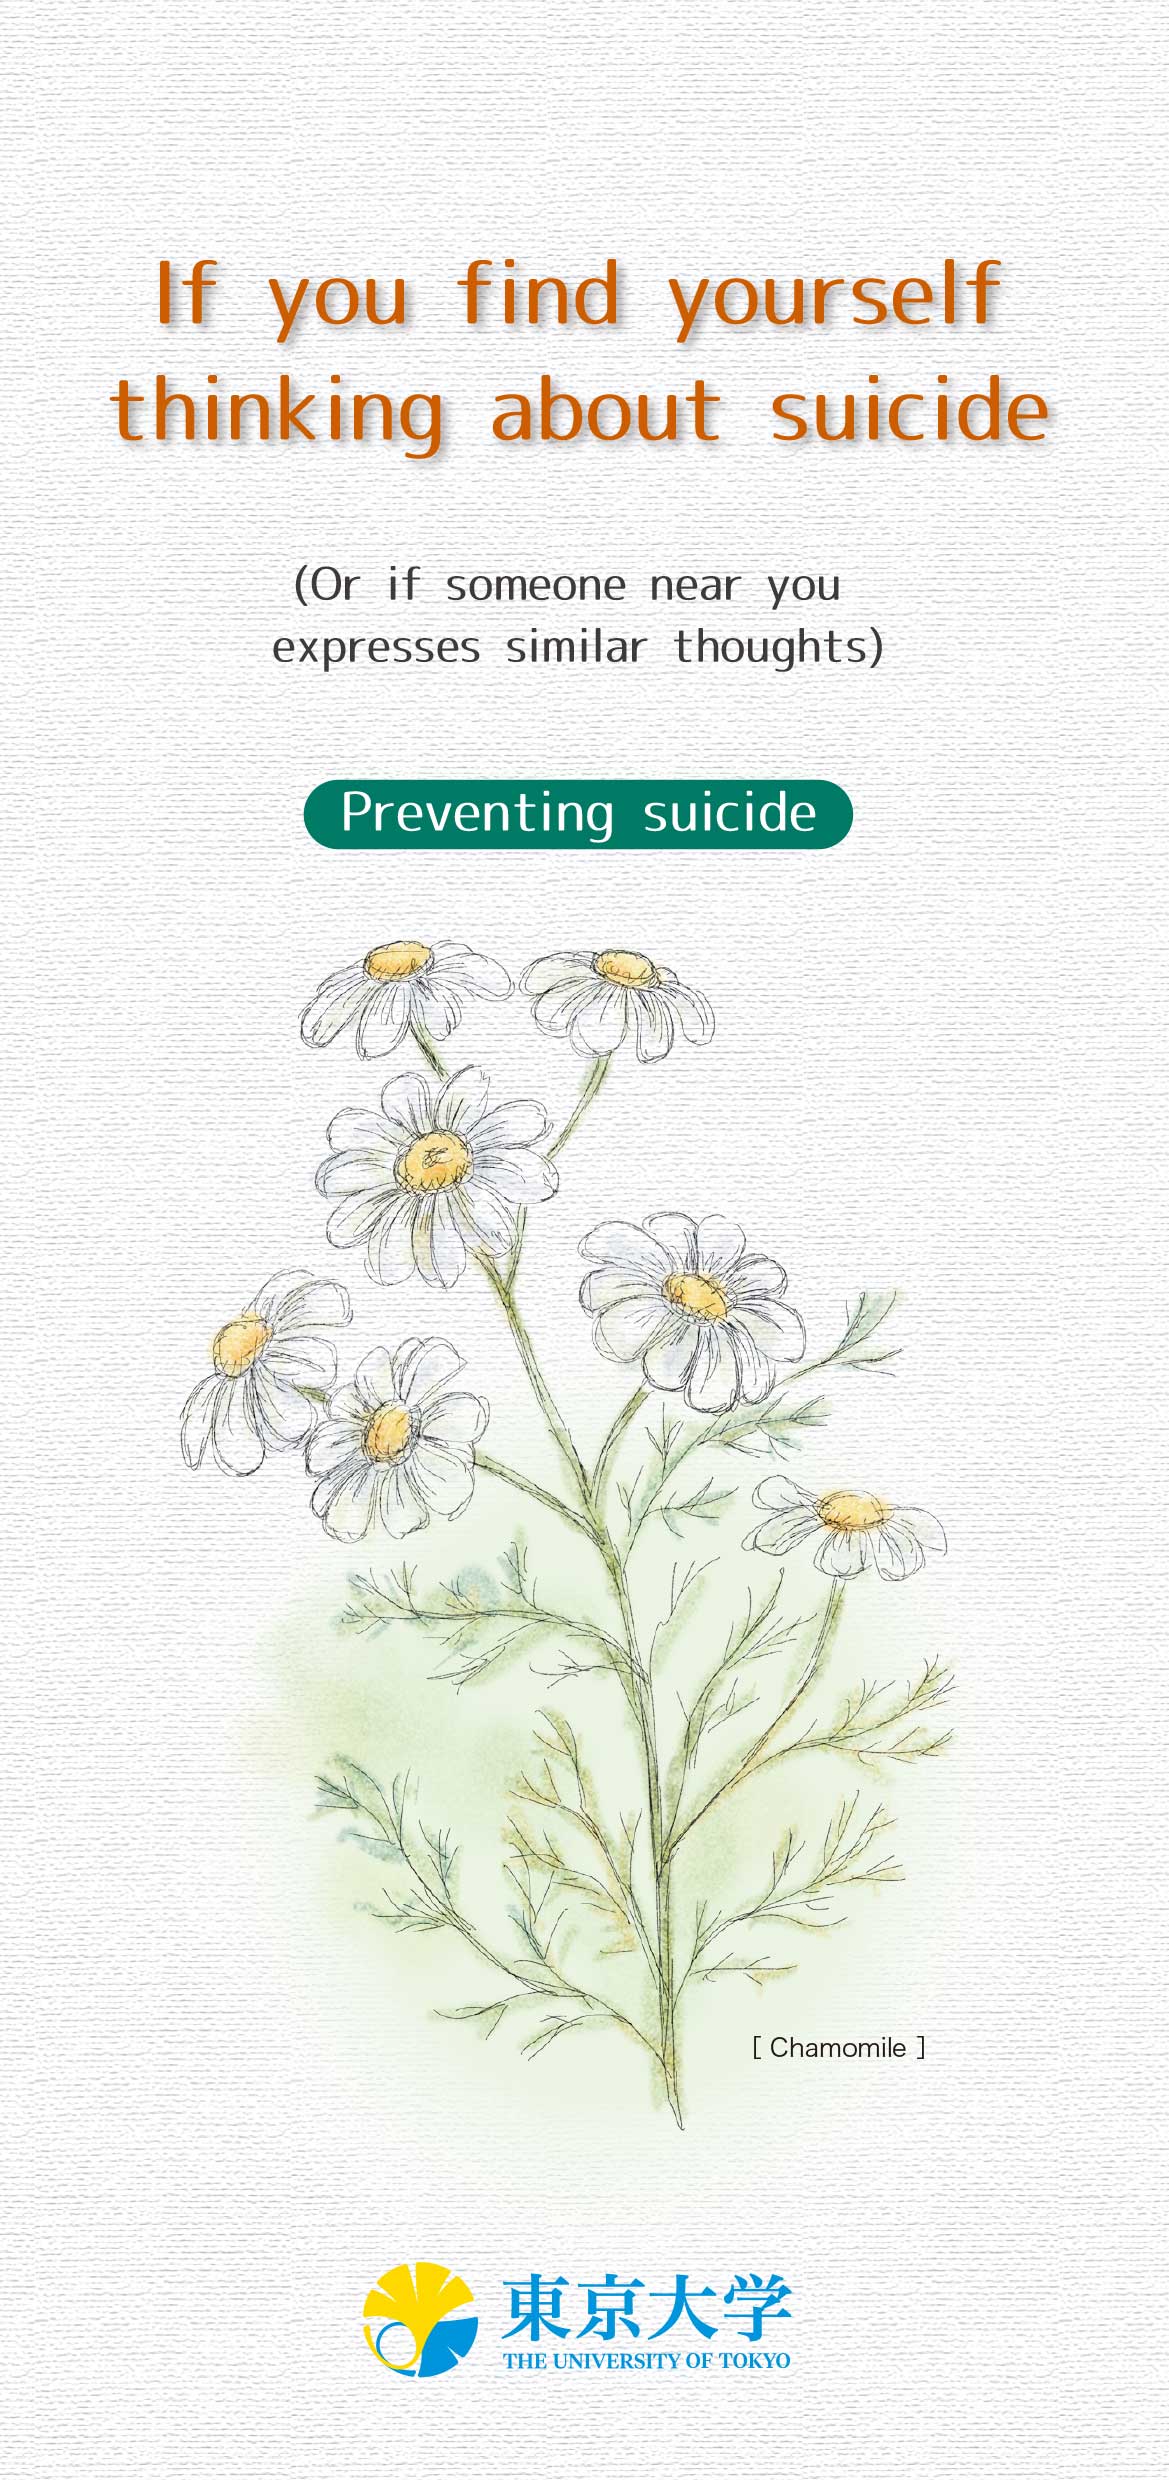 If you find yourself thinking about suicide (Or if someone near you expresses similar thoughts)